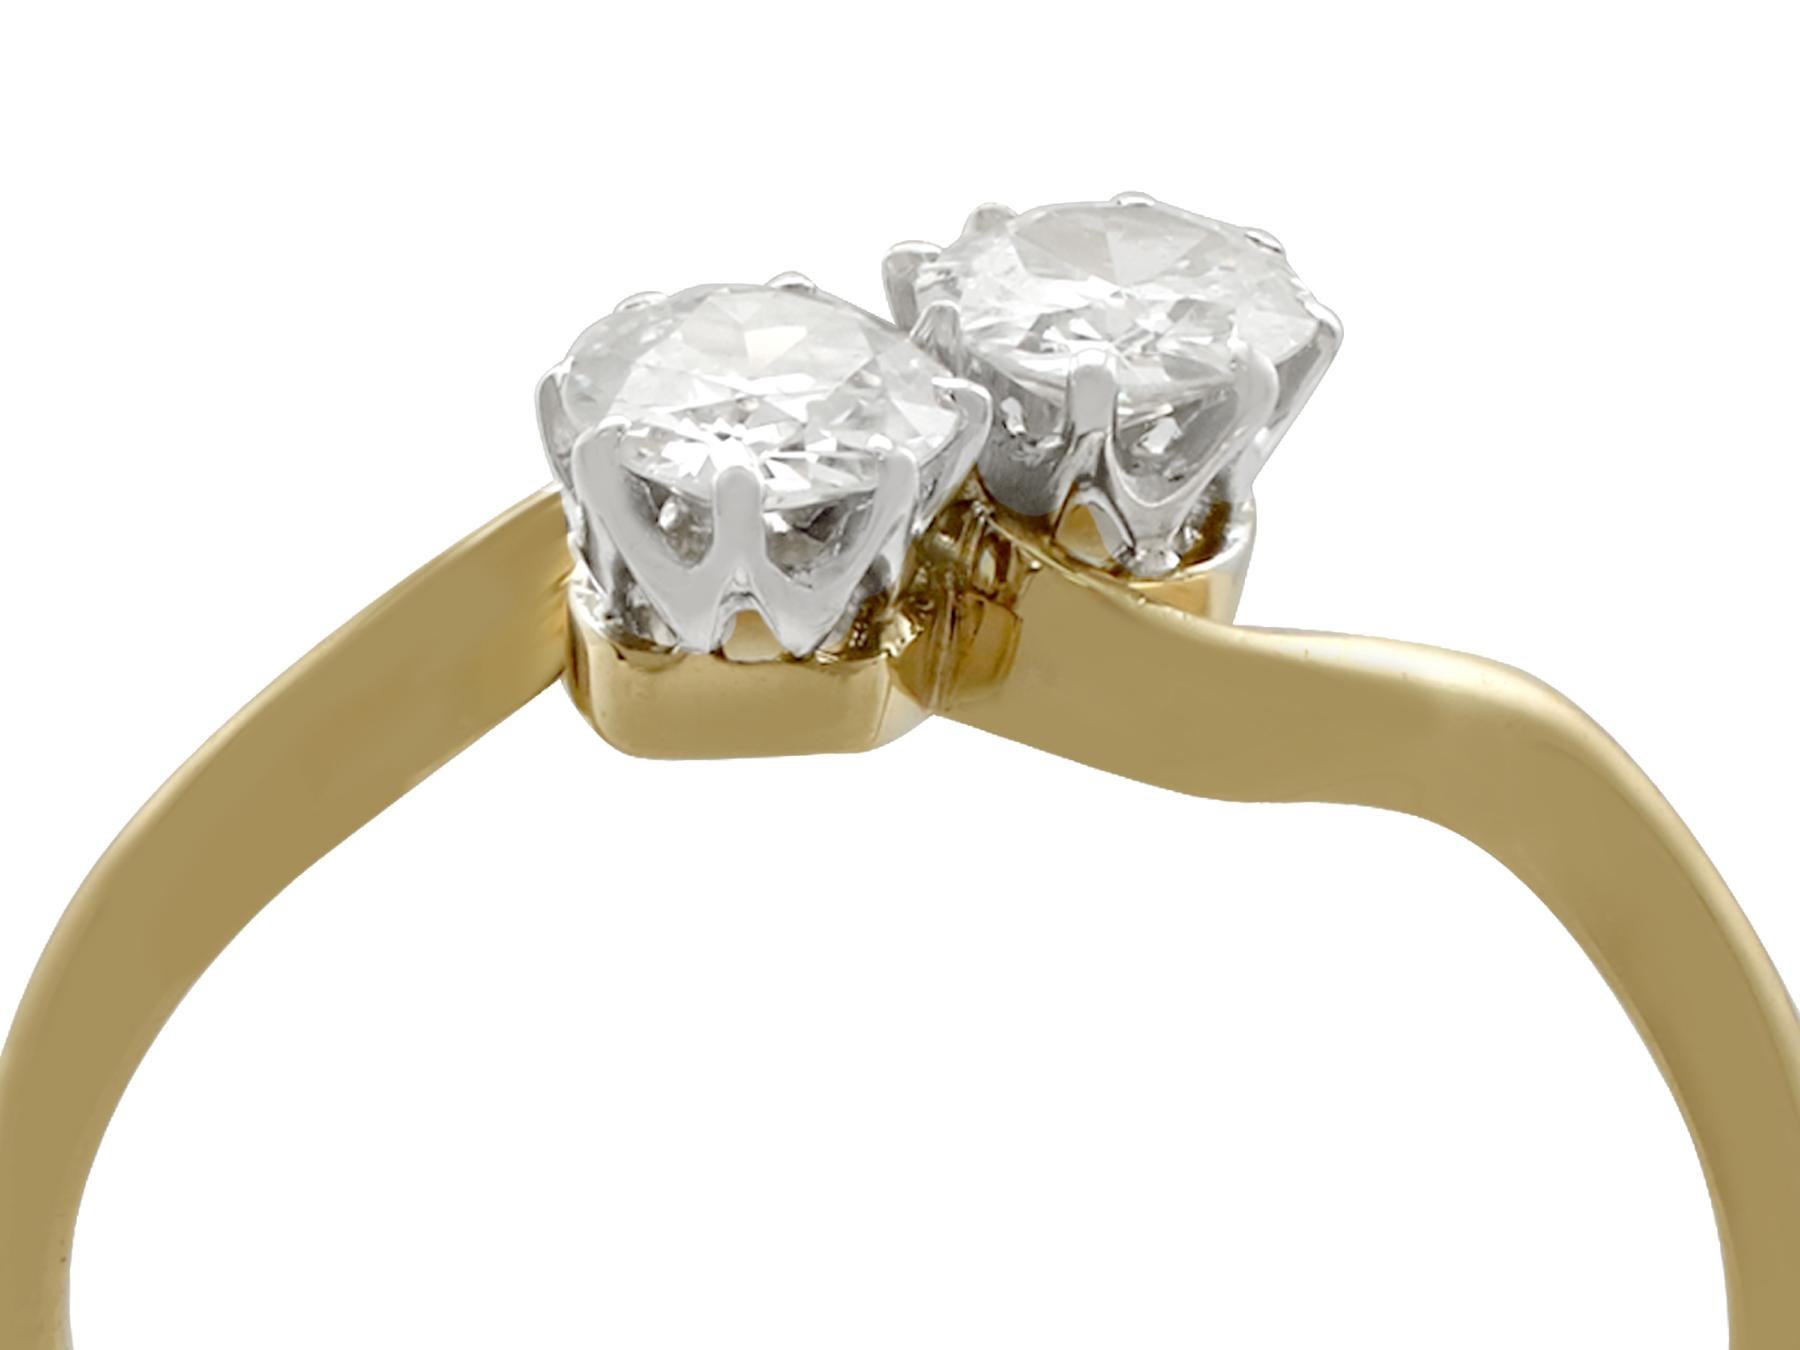 A fine and impressive platinum set antique 0.56 carat diamond twist ring in 18 karat yellow gold; part of our antique jewelry and estate jewelry collections

This impressive antique diamond twist ring has been crafted in 18k yellow gold with a